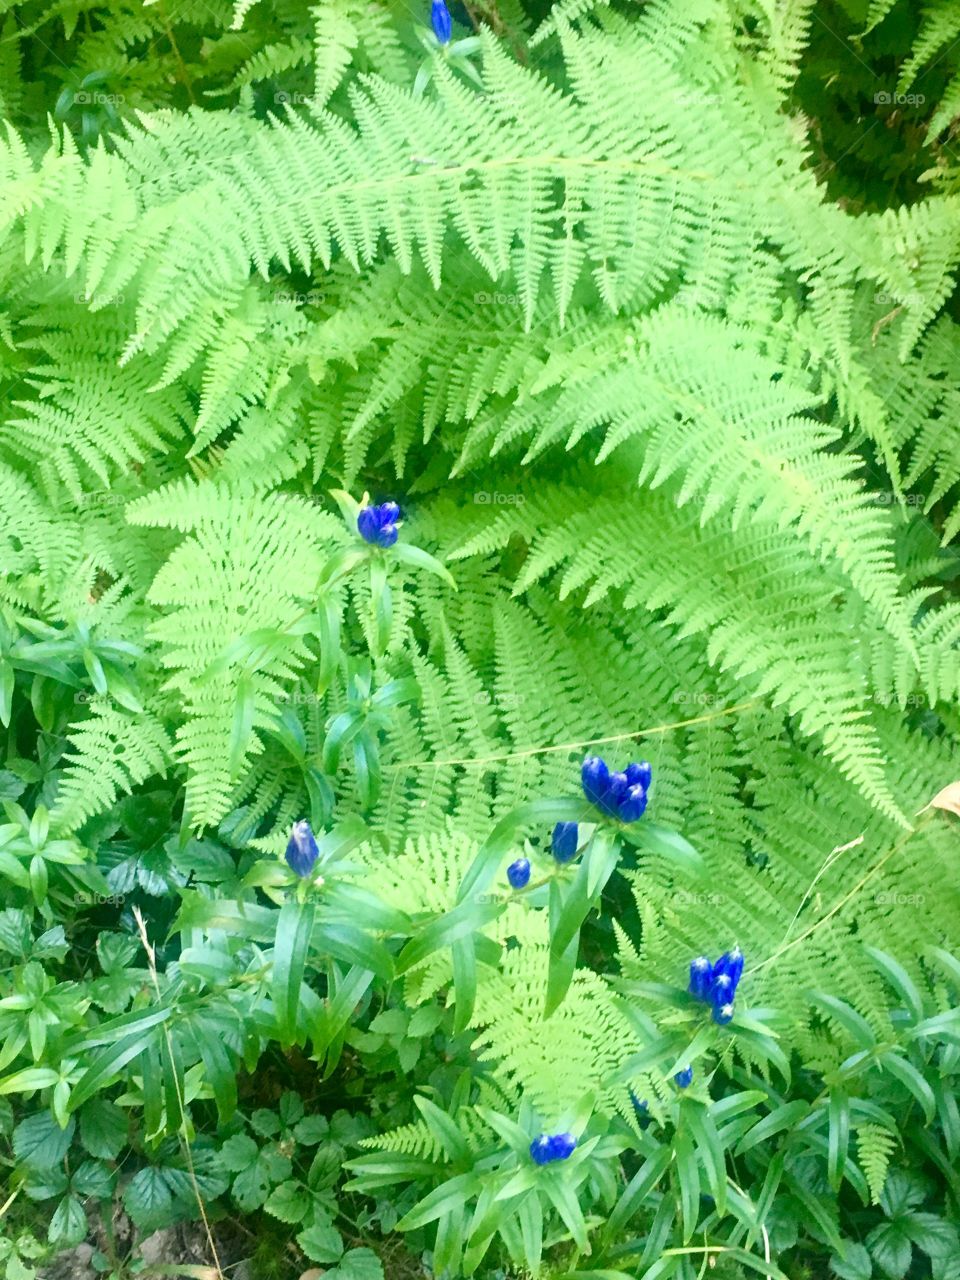 Flowers and Ferns